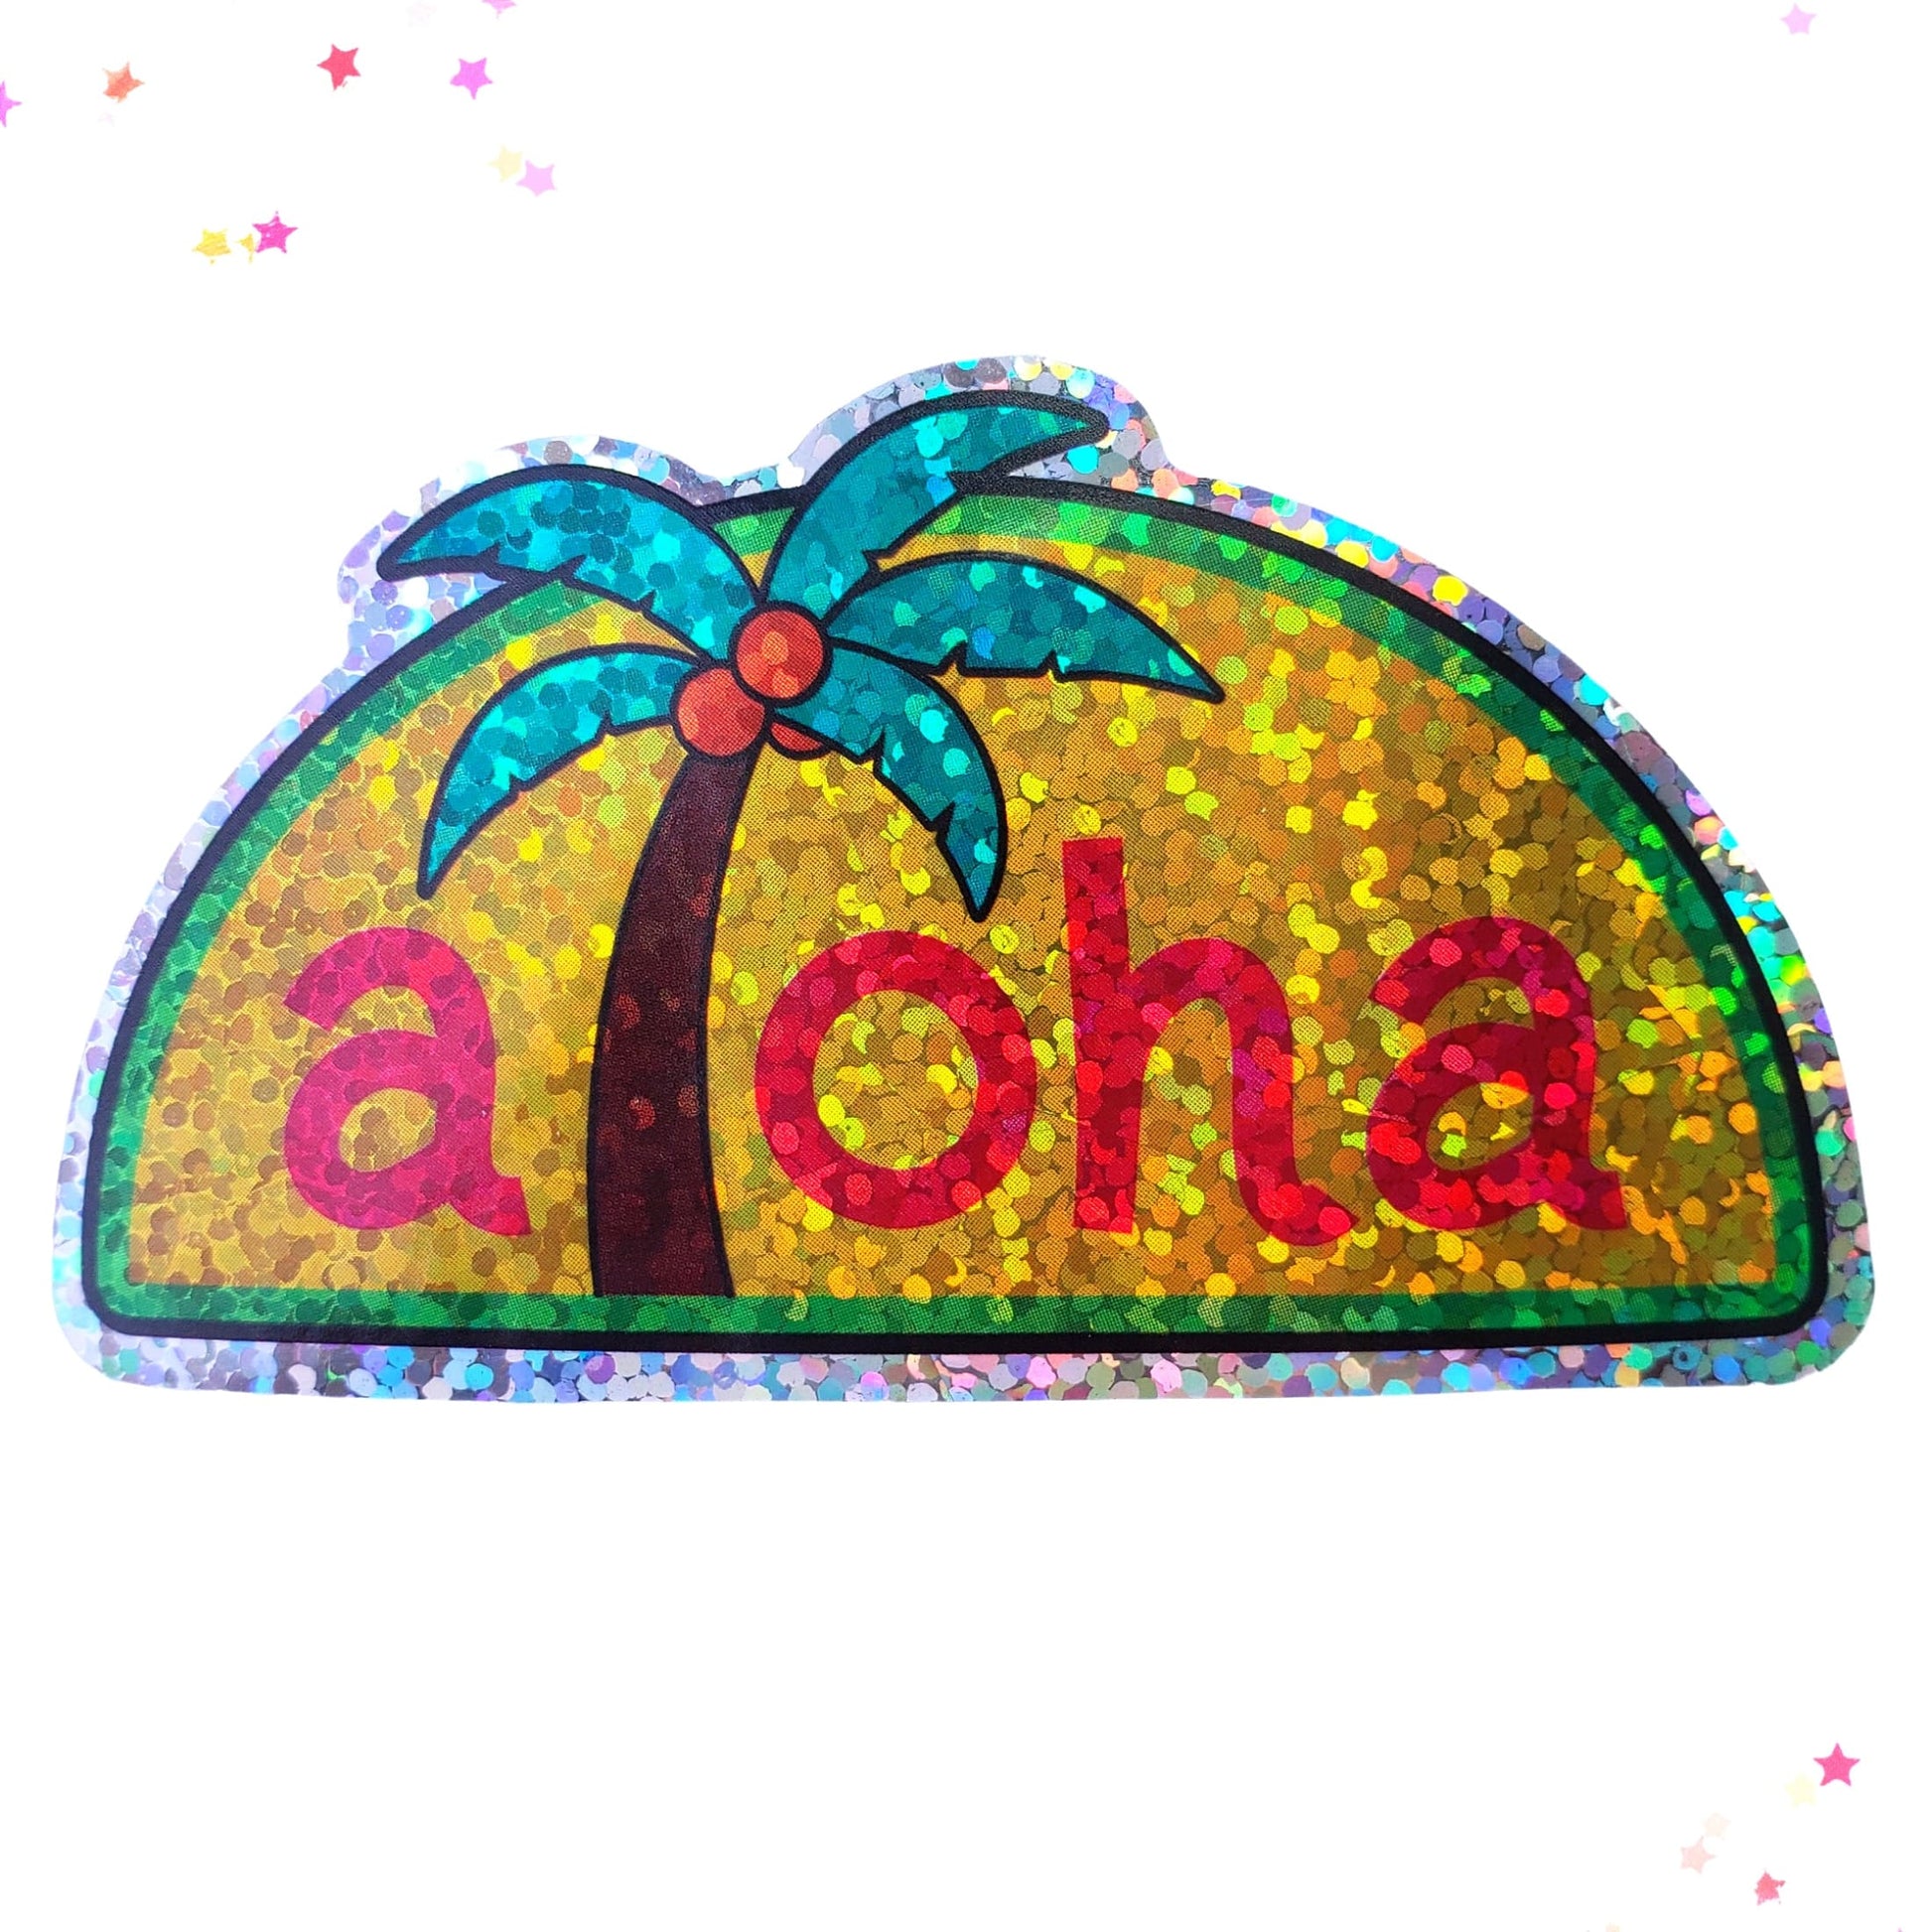 Premium Sticker - Sparkly Holographic Glitter Aloha from Confetti Kitty, Only 2.00